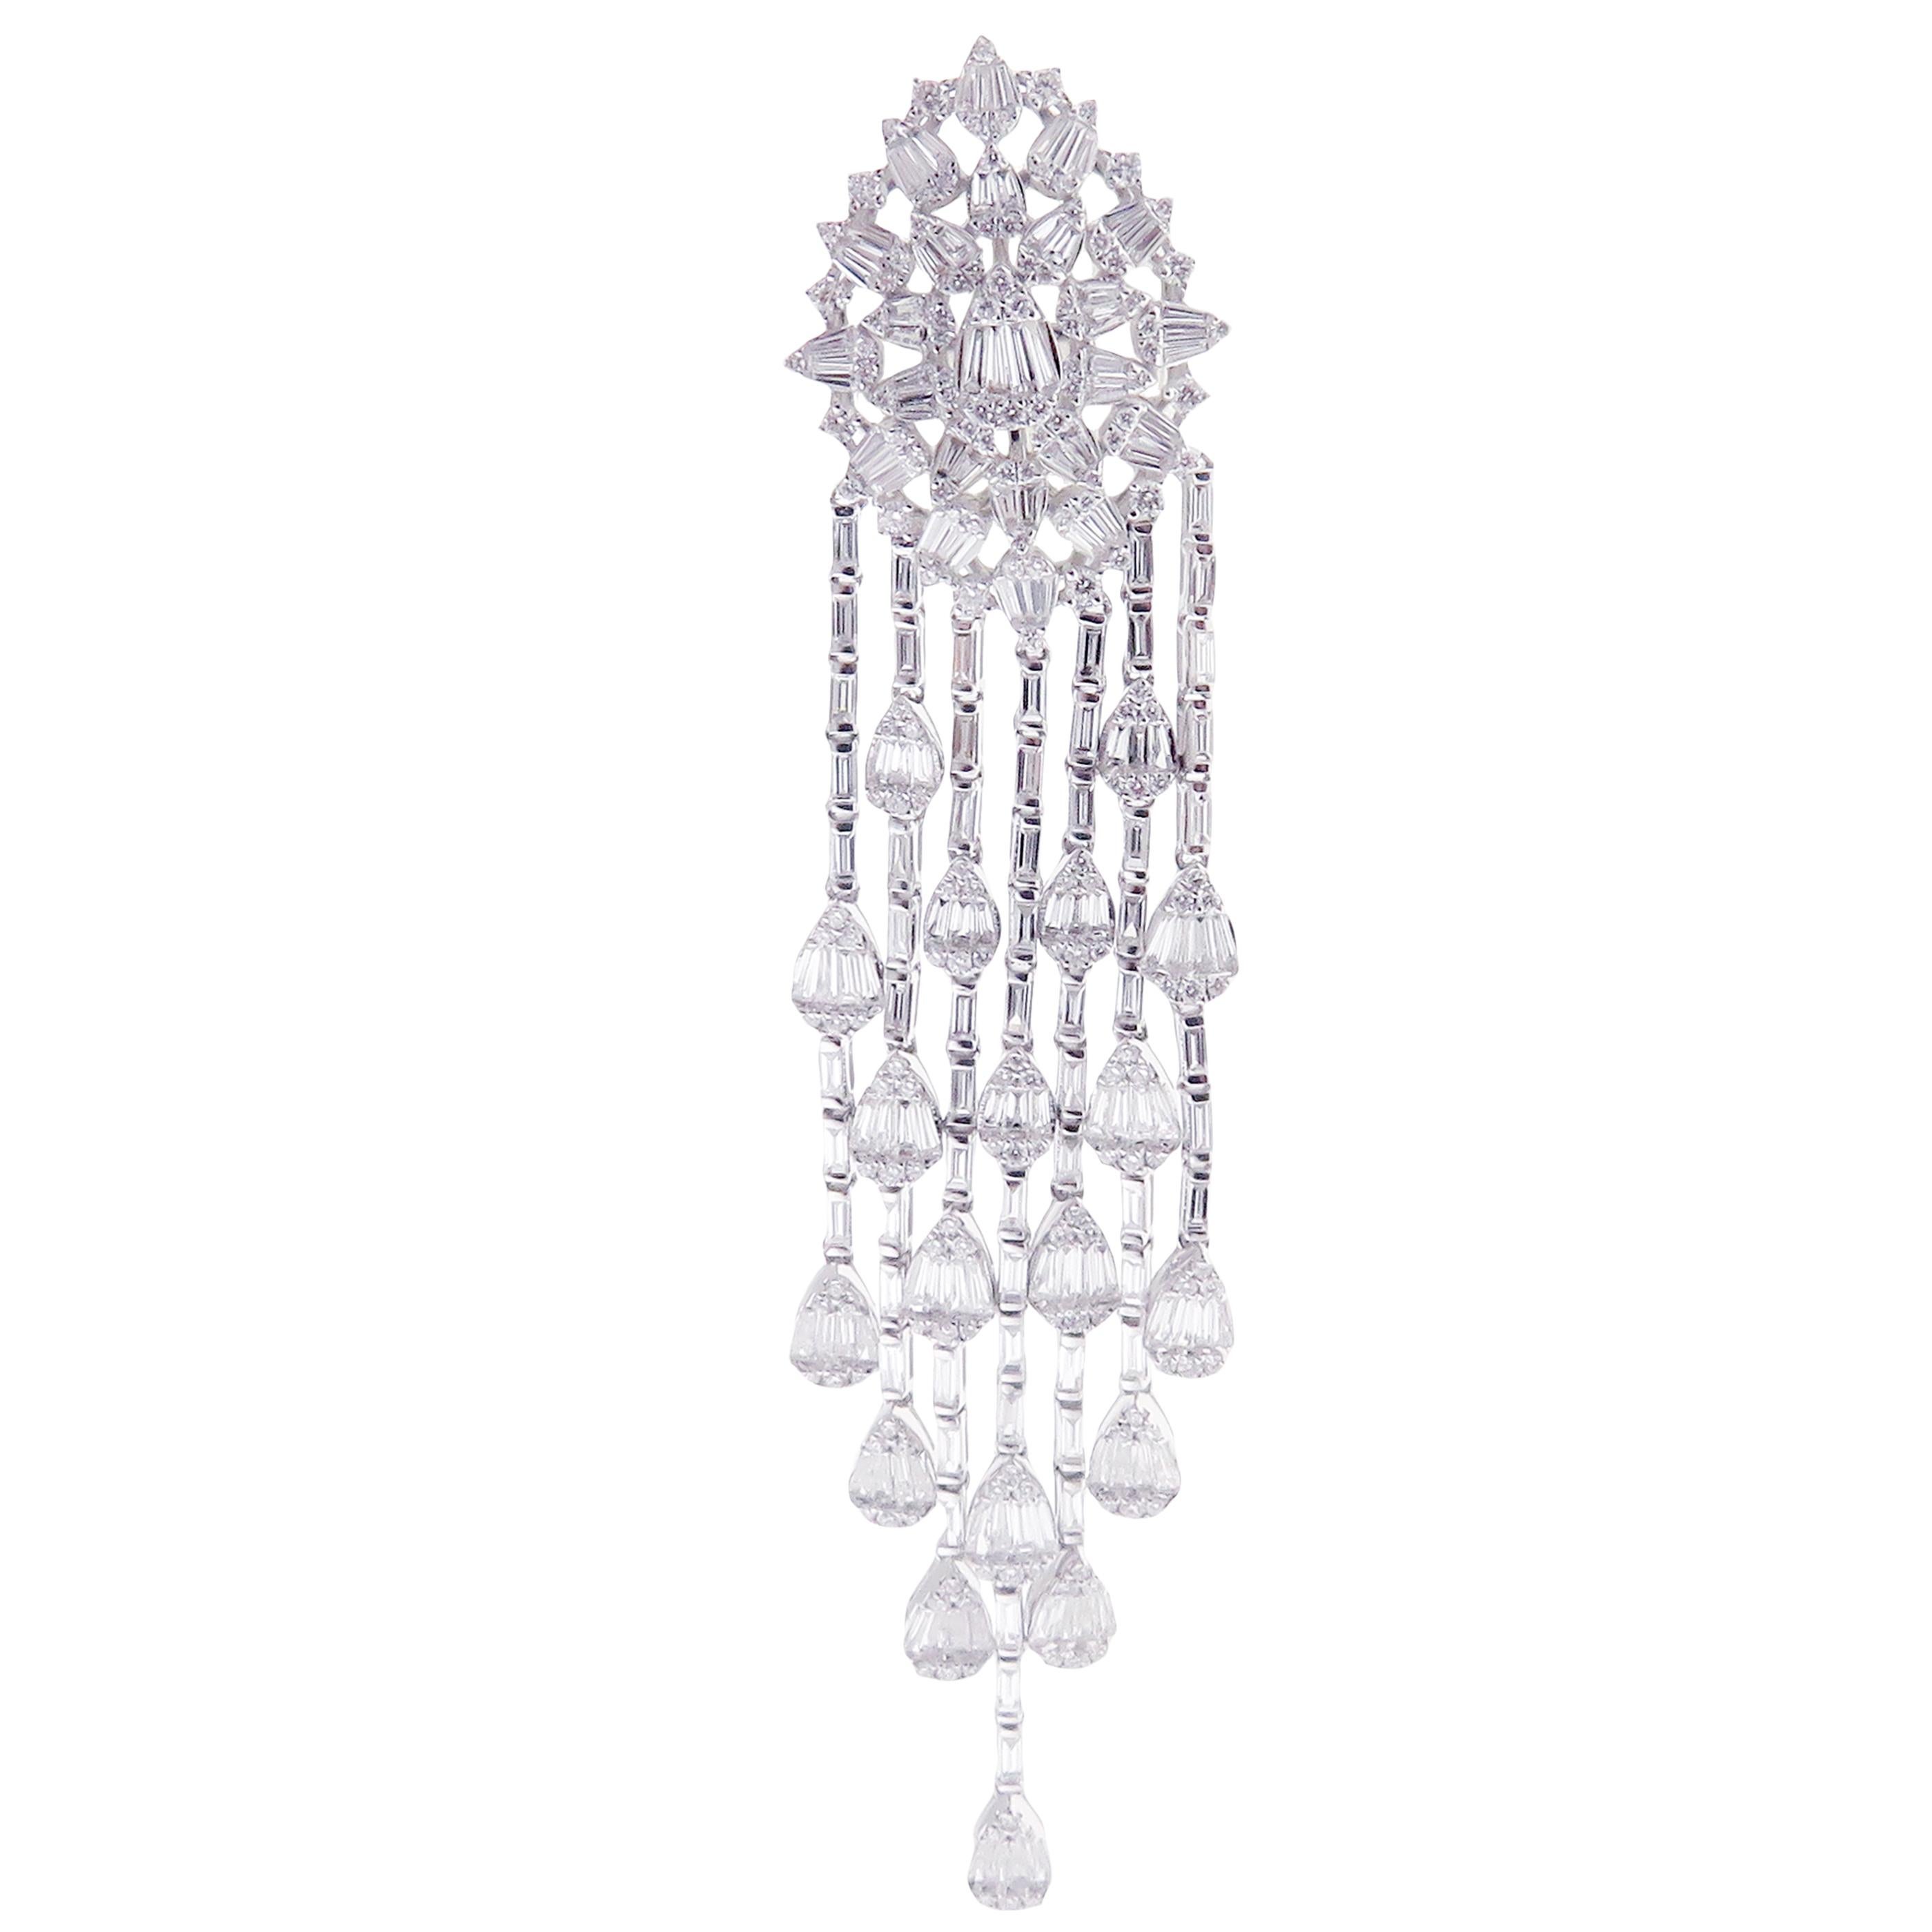 These oval burst chandelier earrings are crafted in 18-karat white gold, weighing approximately 11.87 total carats of SI-V Quality white diamond. Post-Style backing. 

Our Ballroom Chandelier Collection feature earrings for those with bold/classy